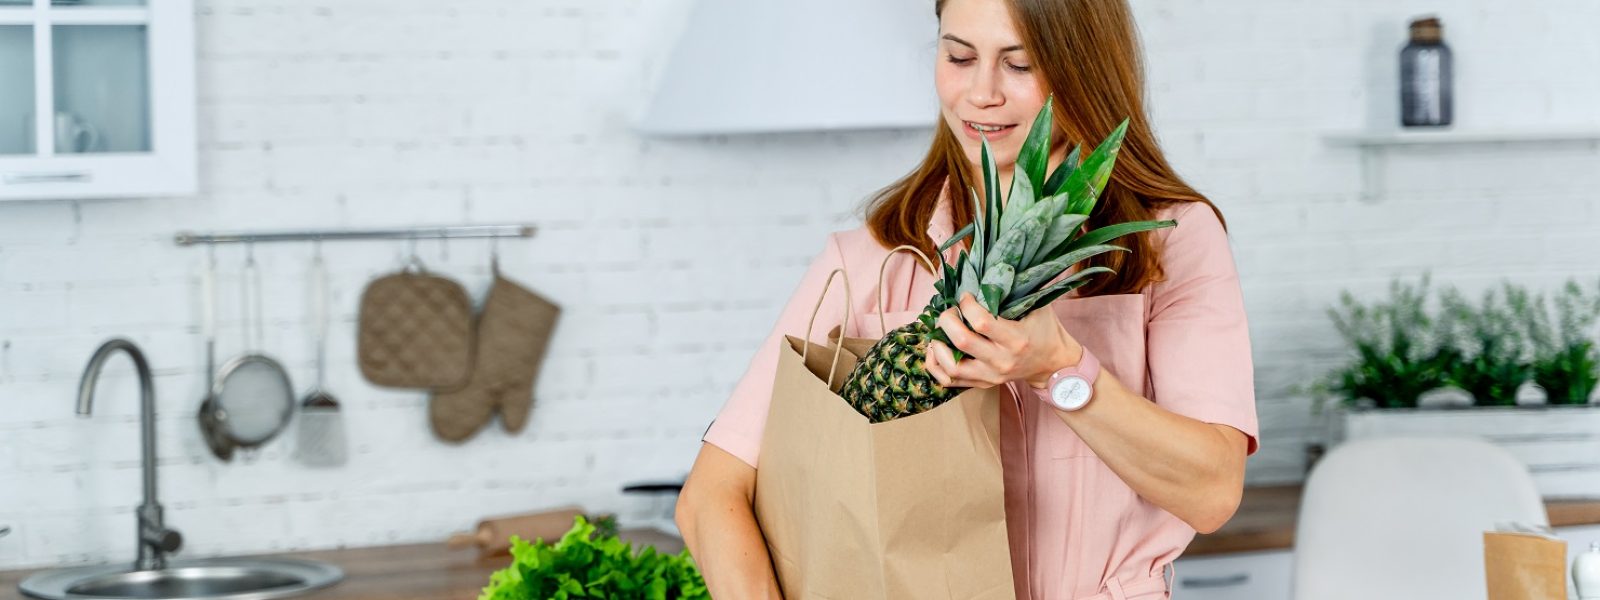 woman with the grocery store packet in the hands. Kitchen background. Young woman with healthy food.